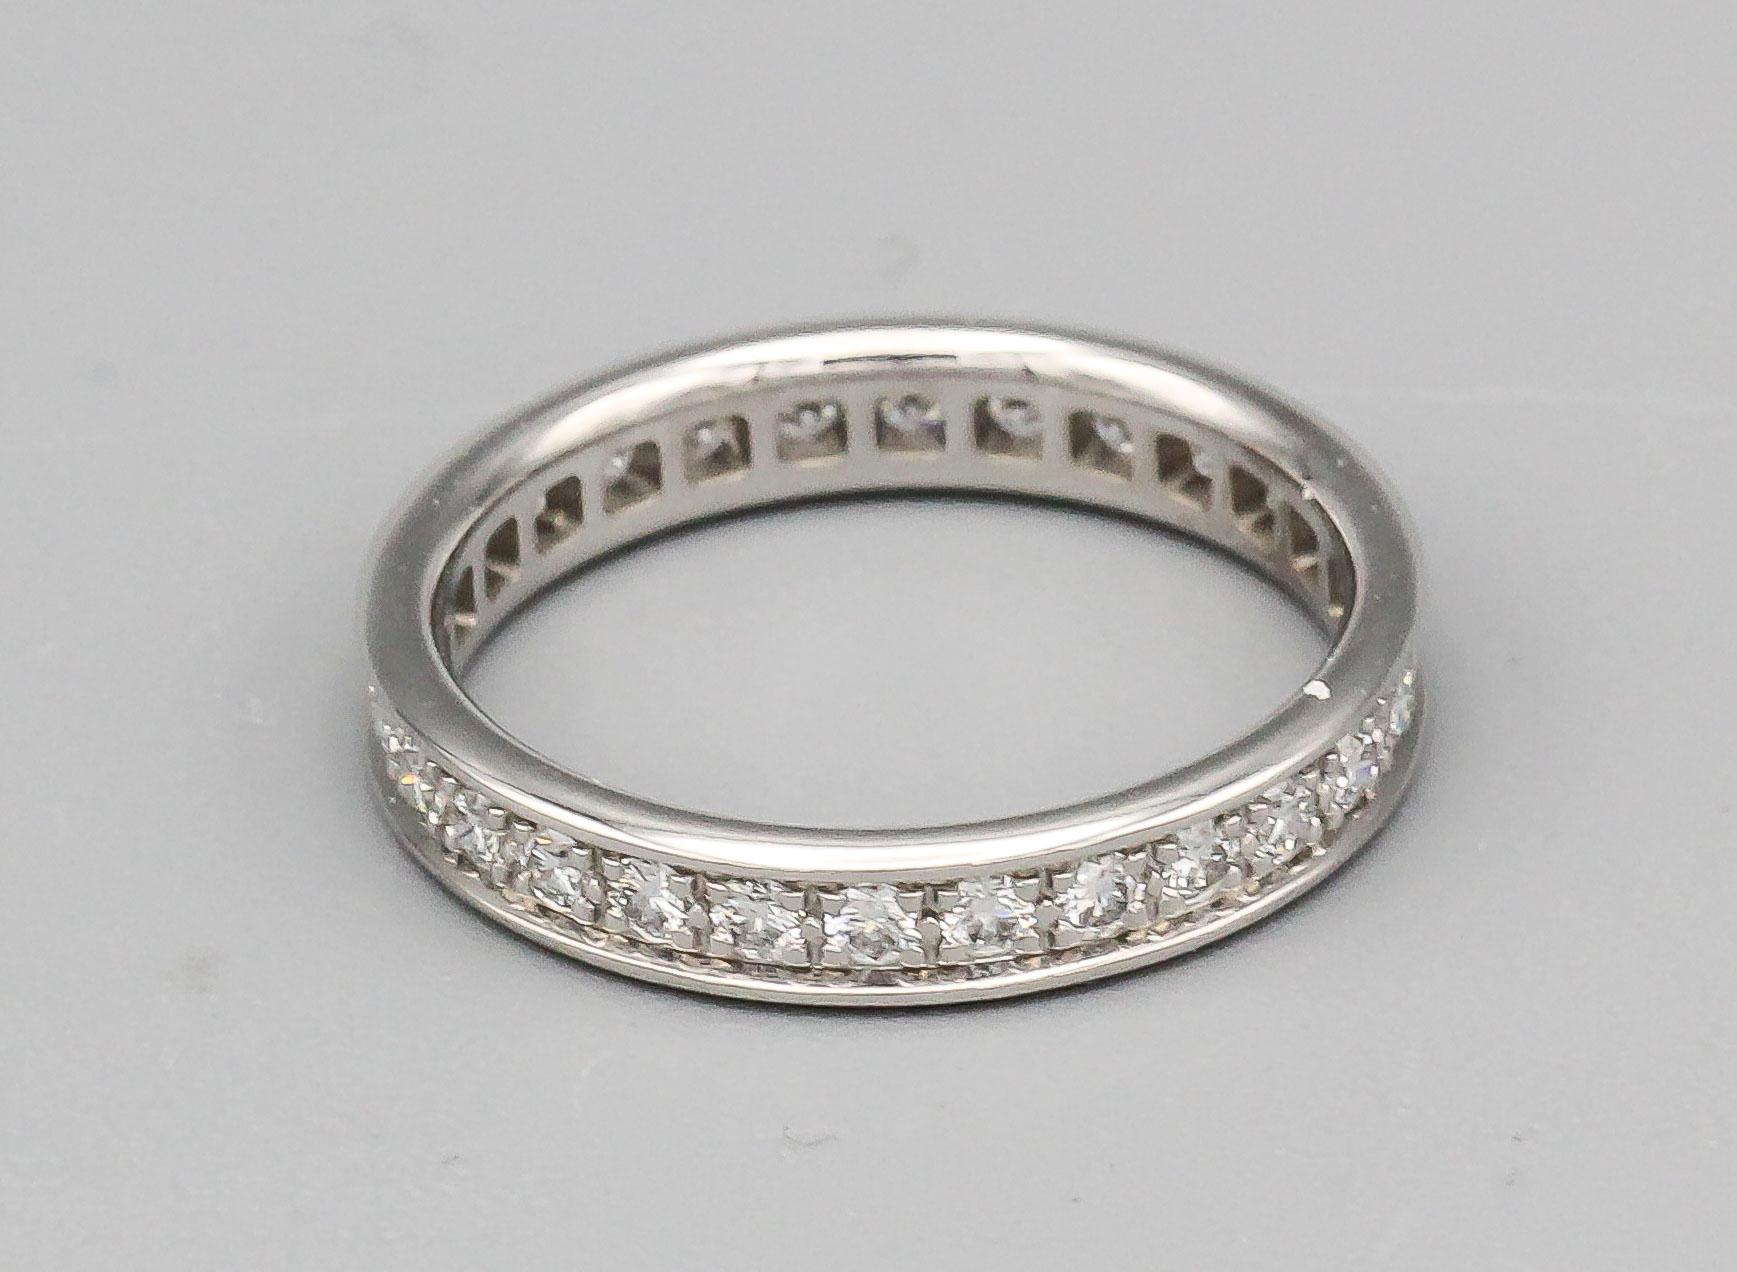 Fine diamond and 18k white gold band by Cartier. It features high grade round brilliant cut diamonds and is 3.3 mm wide. Approx. size 5 (European size 49)

Hallmarks: Cartier, 750, 49, reference numbers, maker's mark.